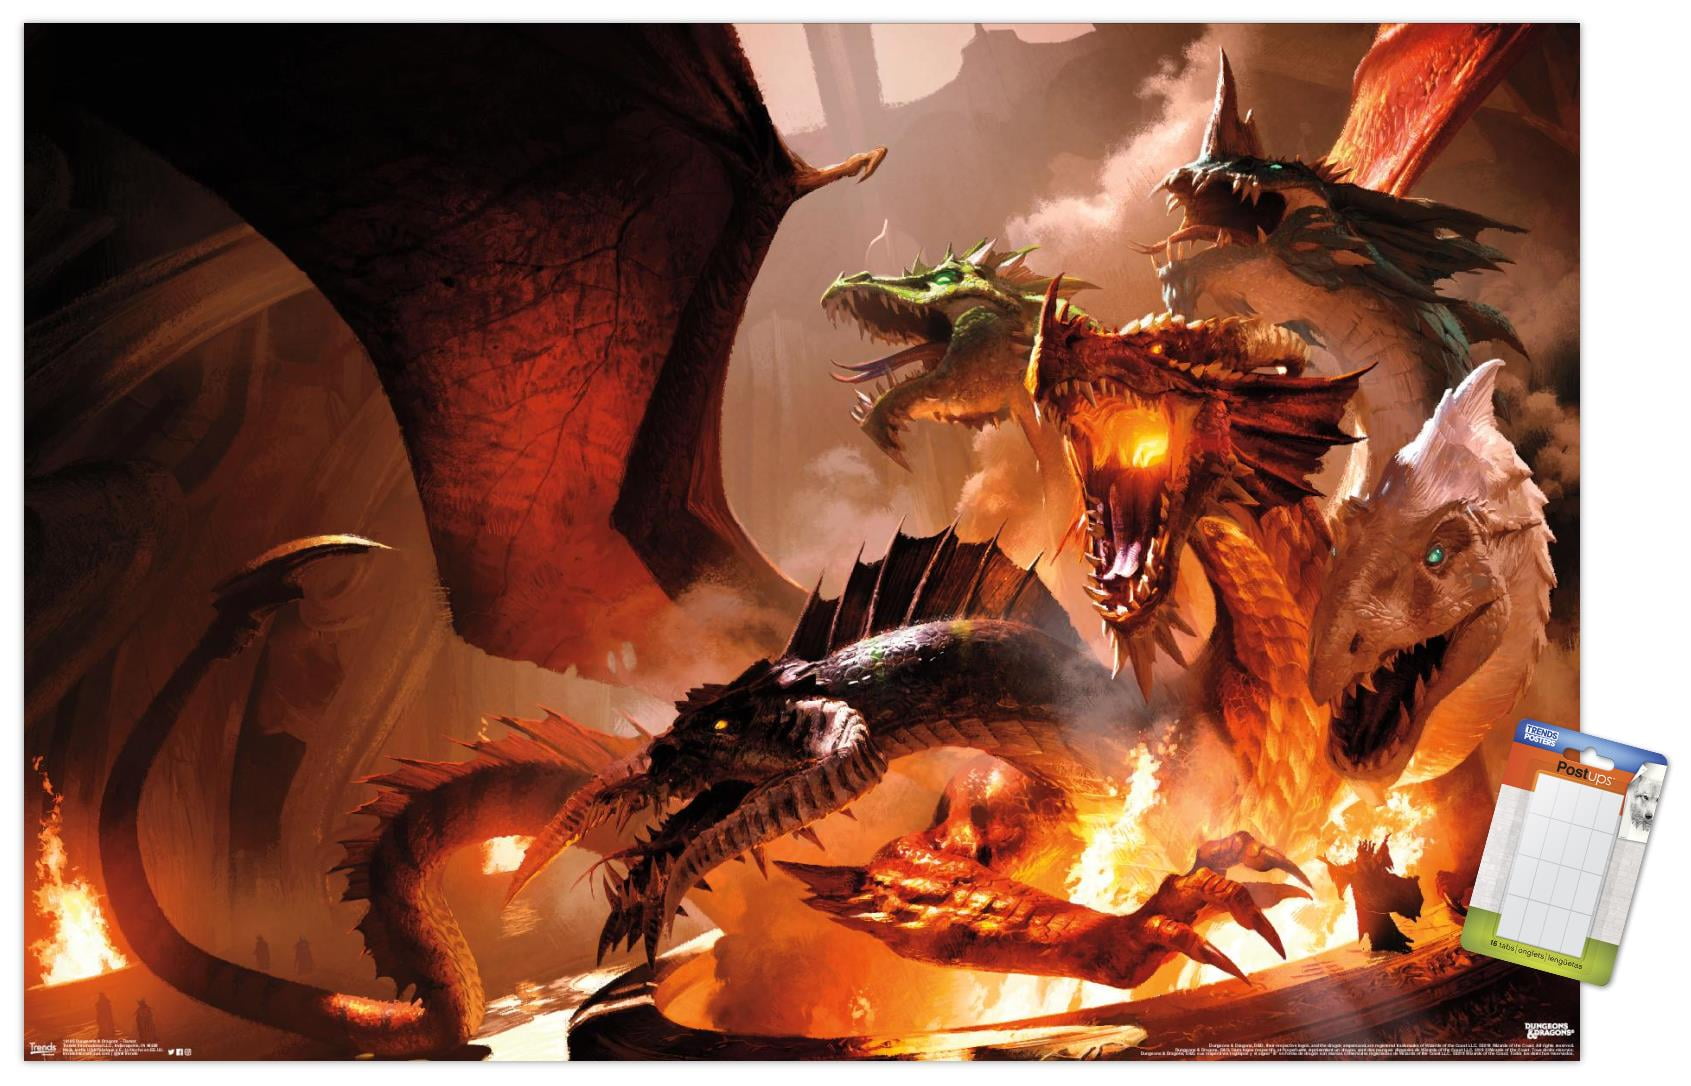 Dungeons & Dragons Adventure Gaming Maxi Poster Picture 61x91.5cm24x36 inches